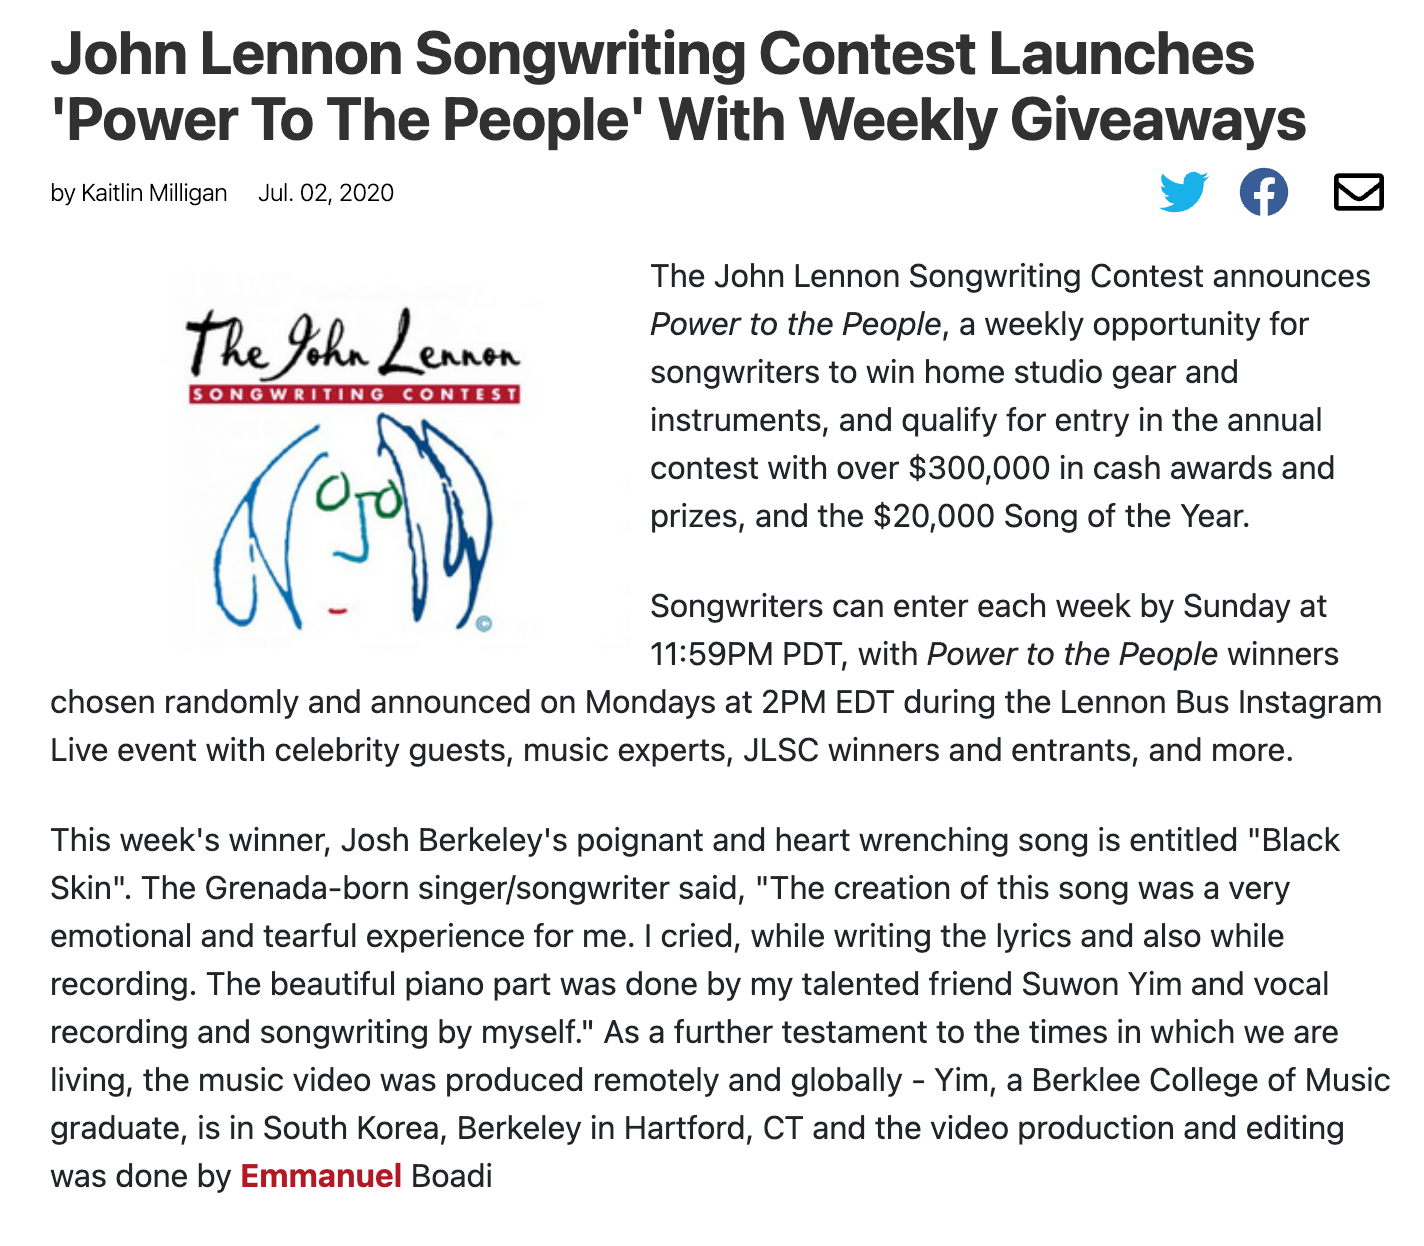 John Lennon Songwriting Contest Launches ‘Power To The People’ With Weekly Giveaways